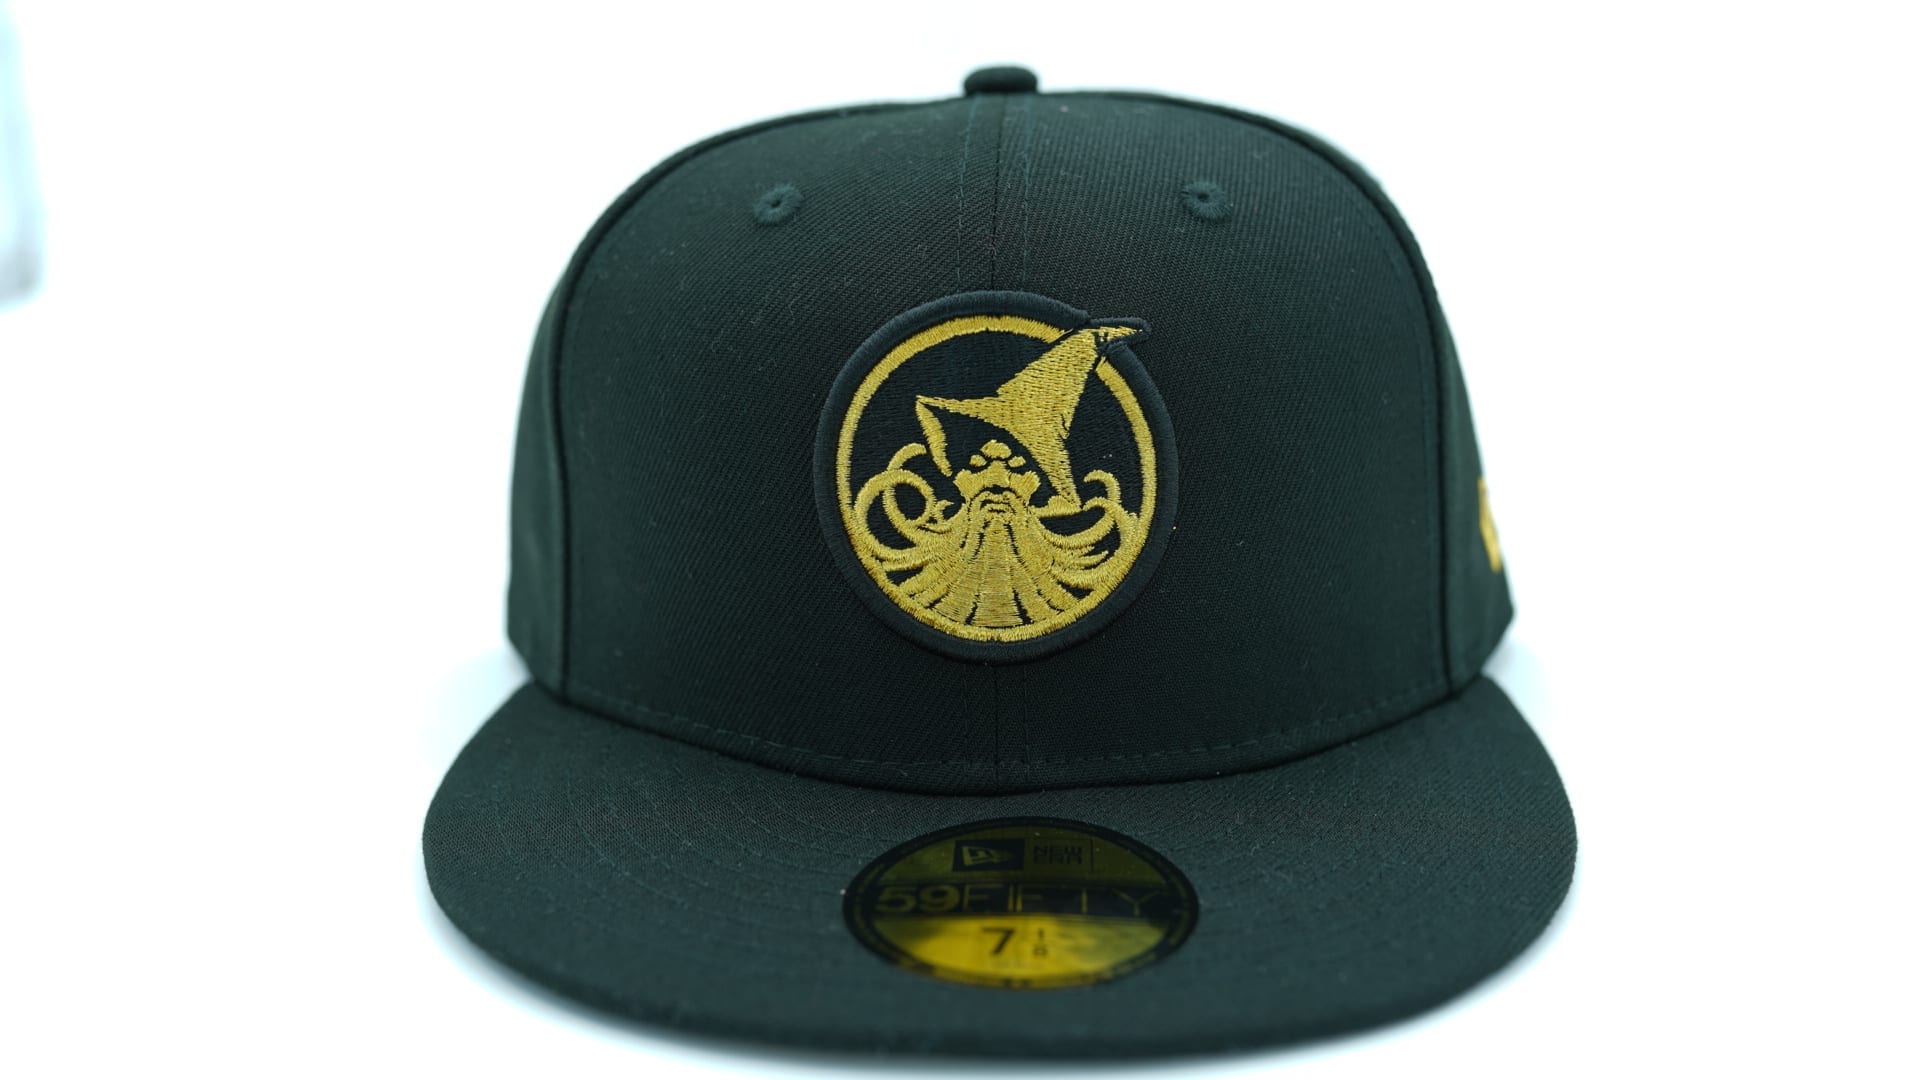 bx-new-era-59fifty-fitted-cap-hat_1.jpg